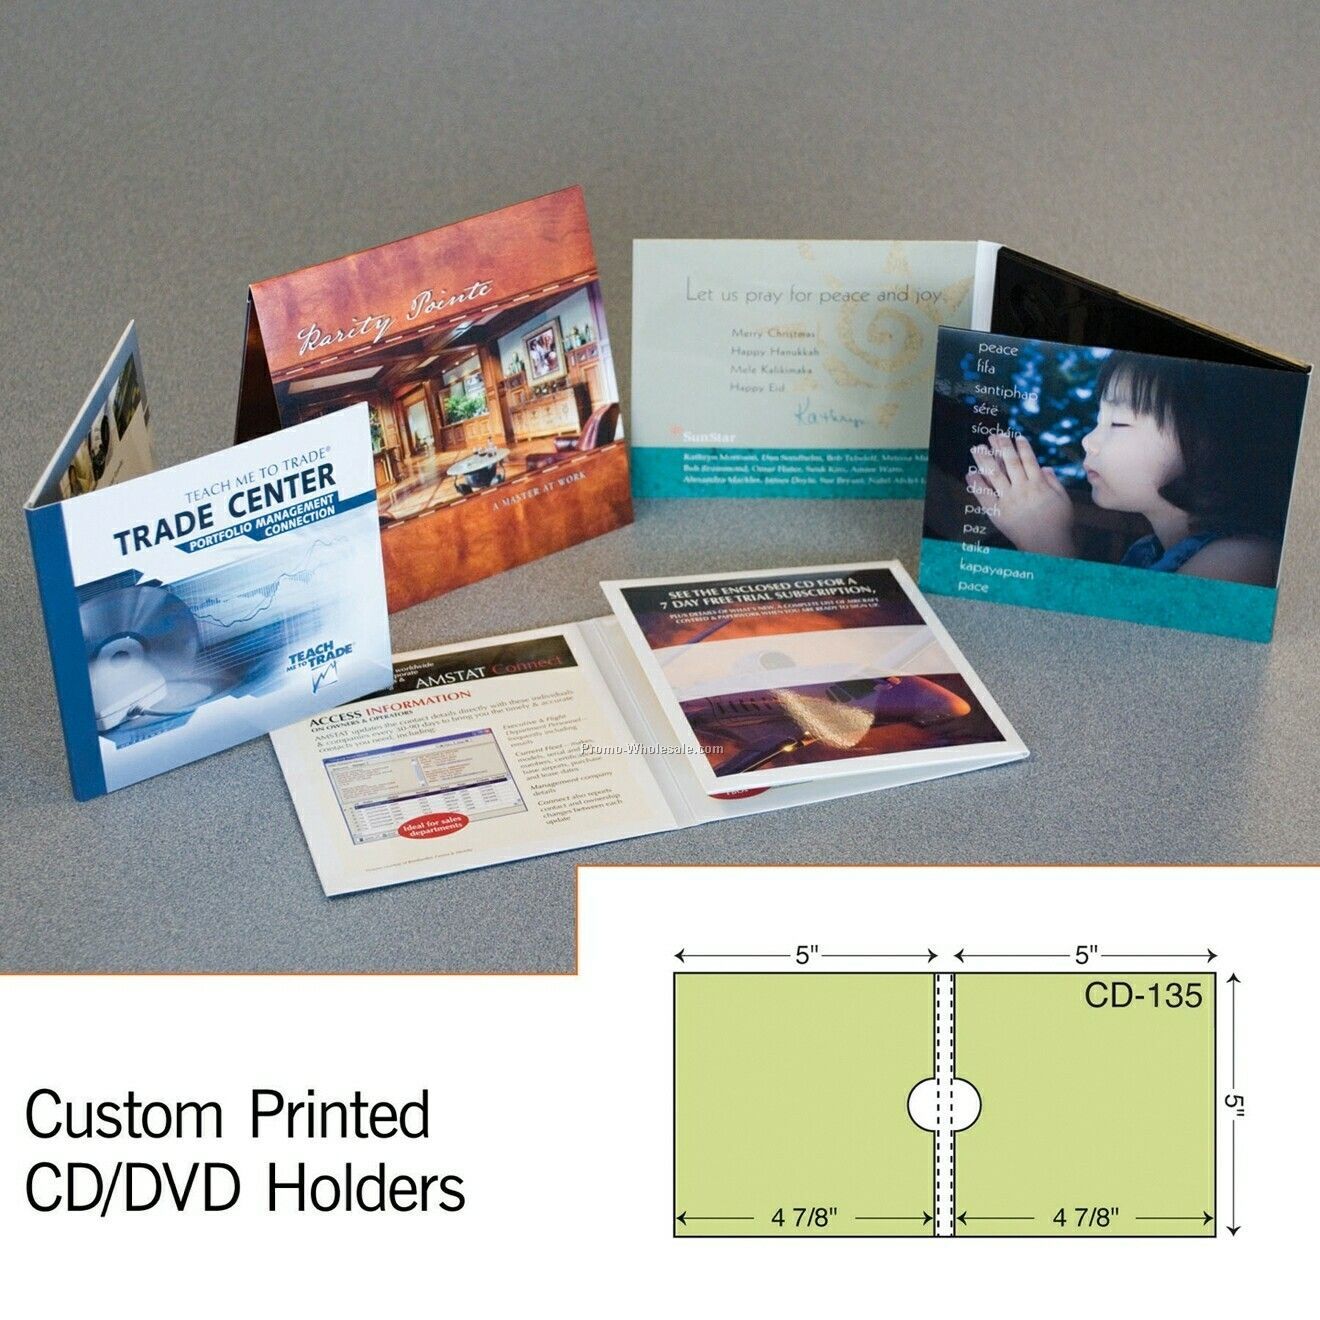 5"x5-1/2" CD Sleeve W/ Reinforced Panel (4 Color Process)